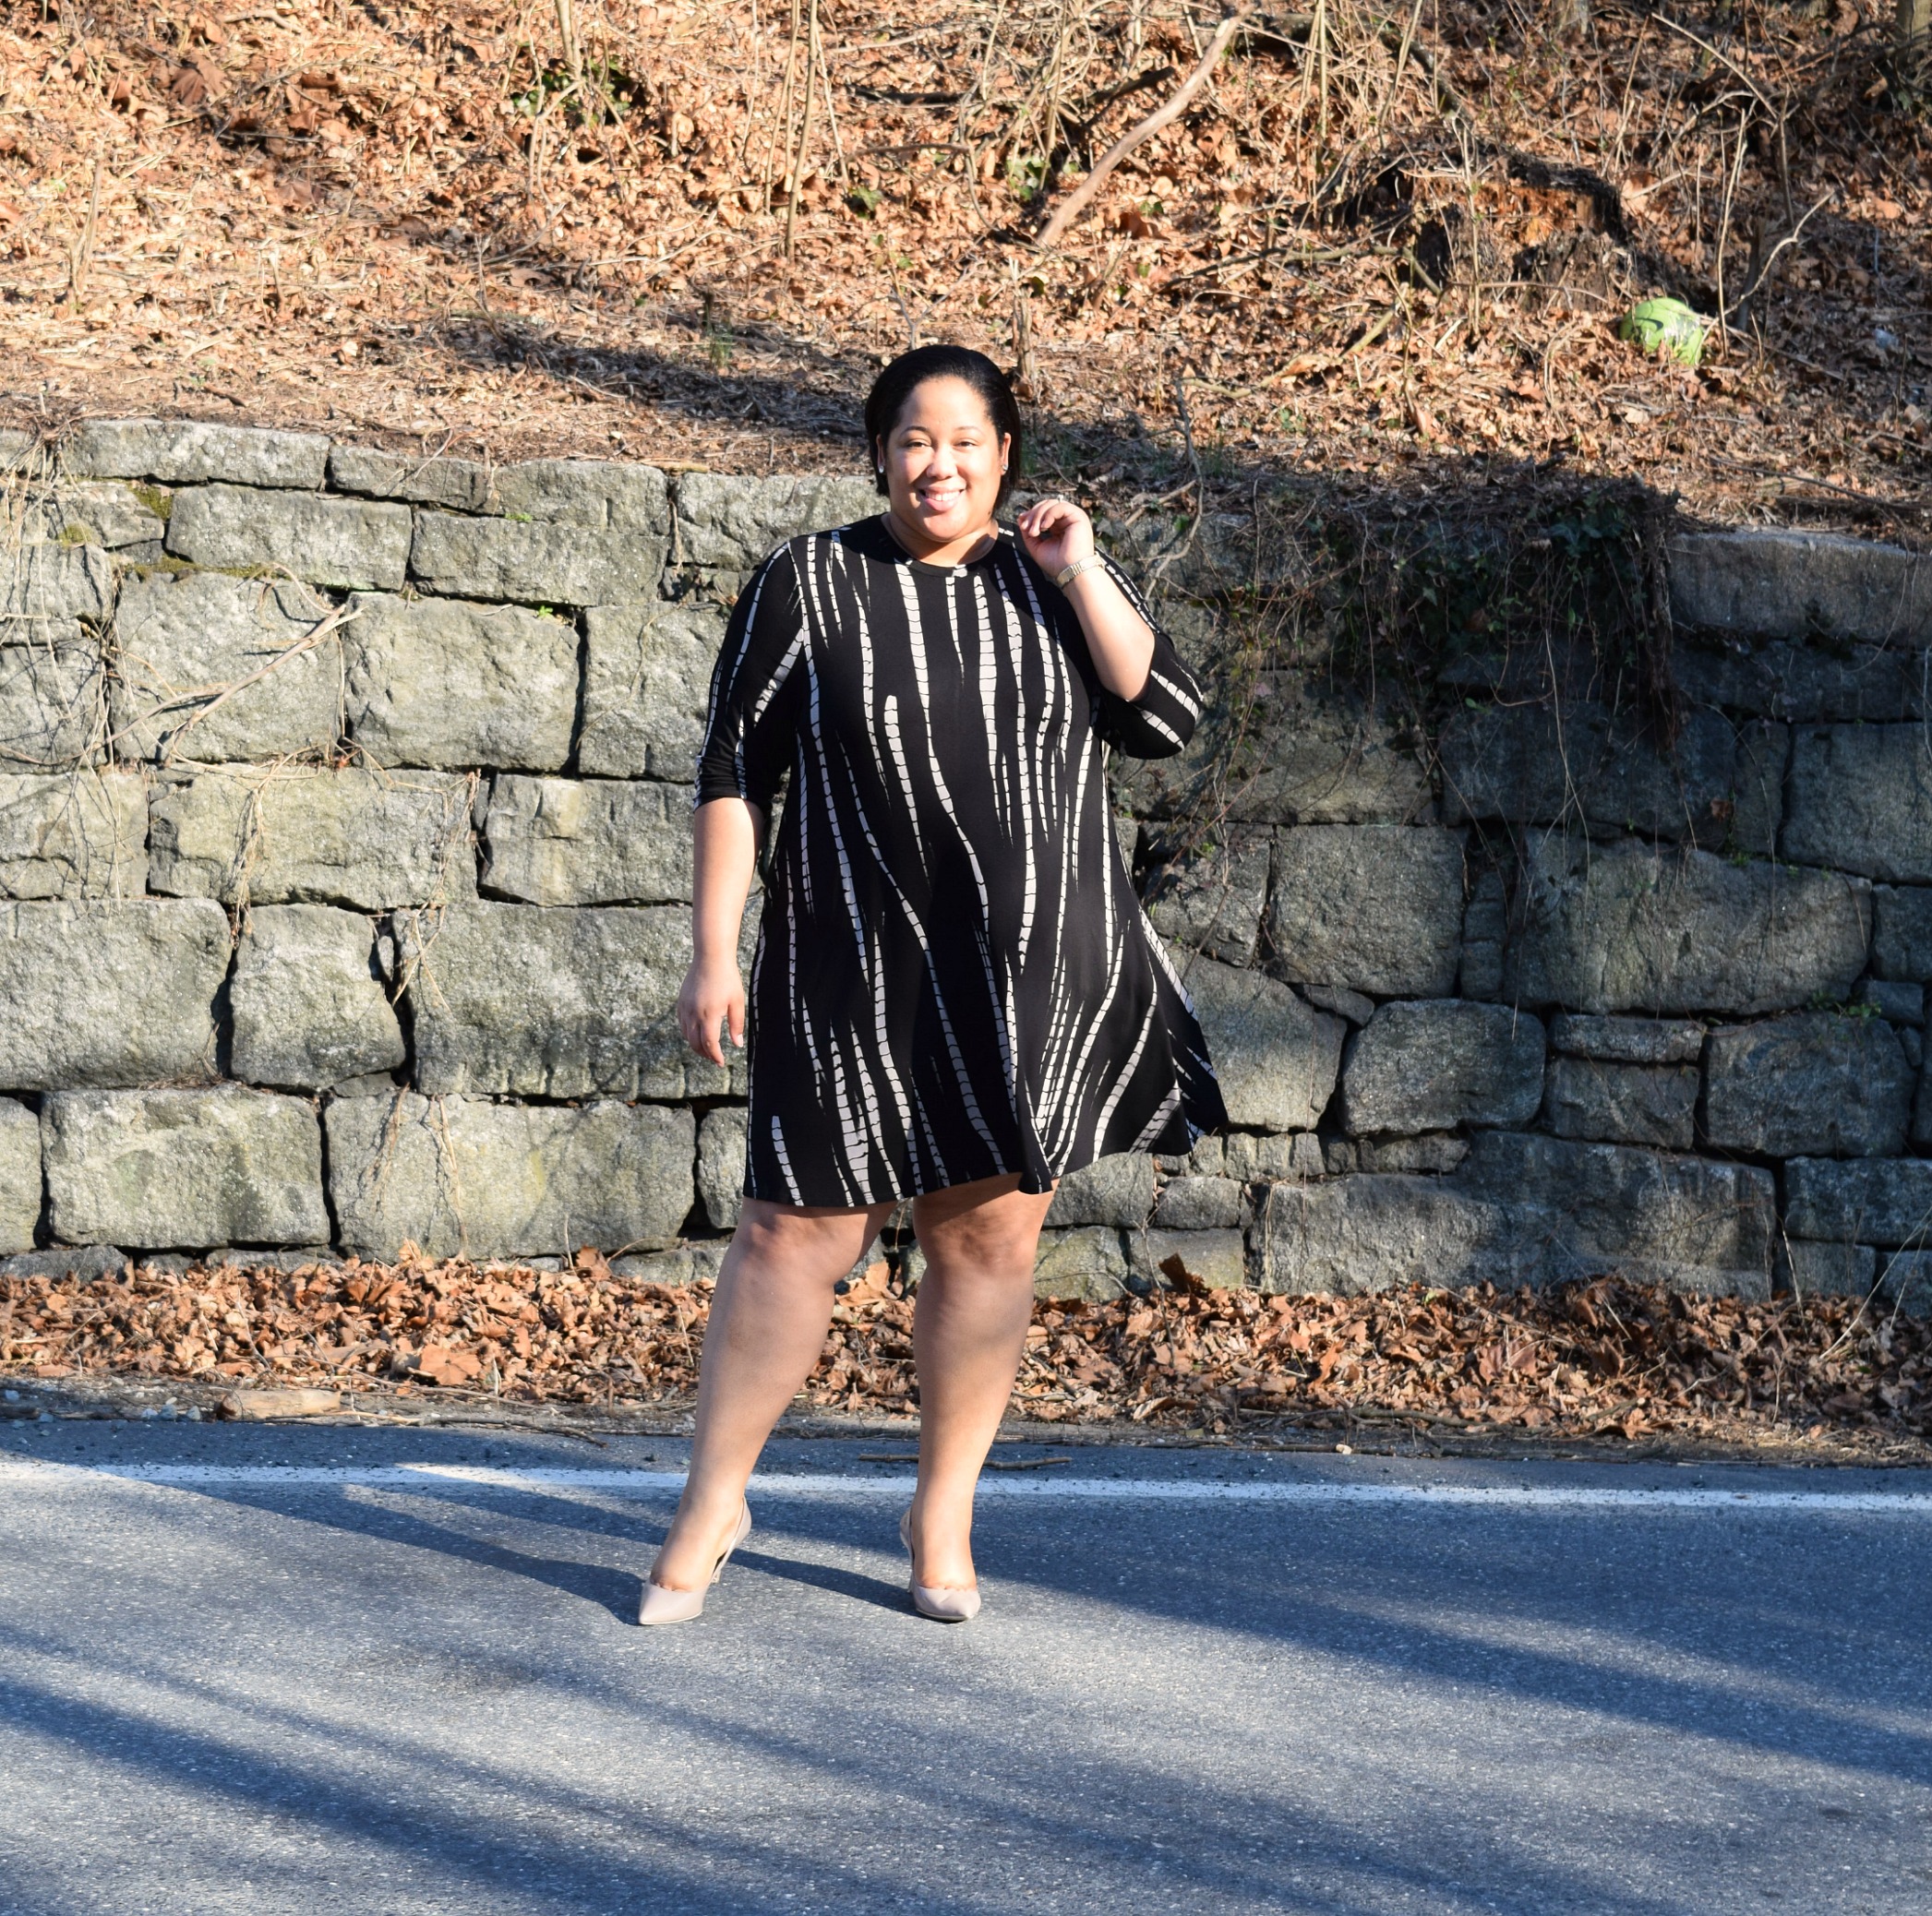 Plus Size Fashion - Dress for Your Body Type 